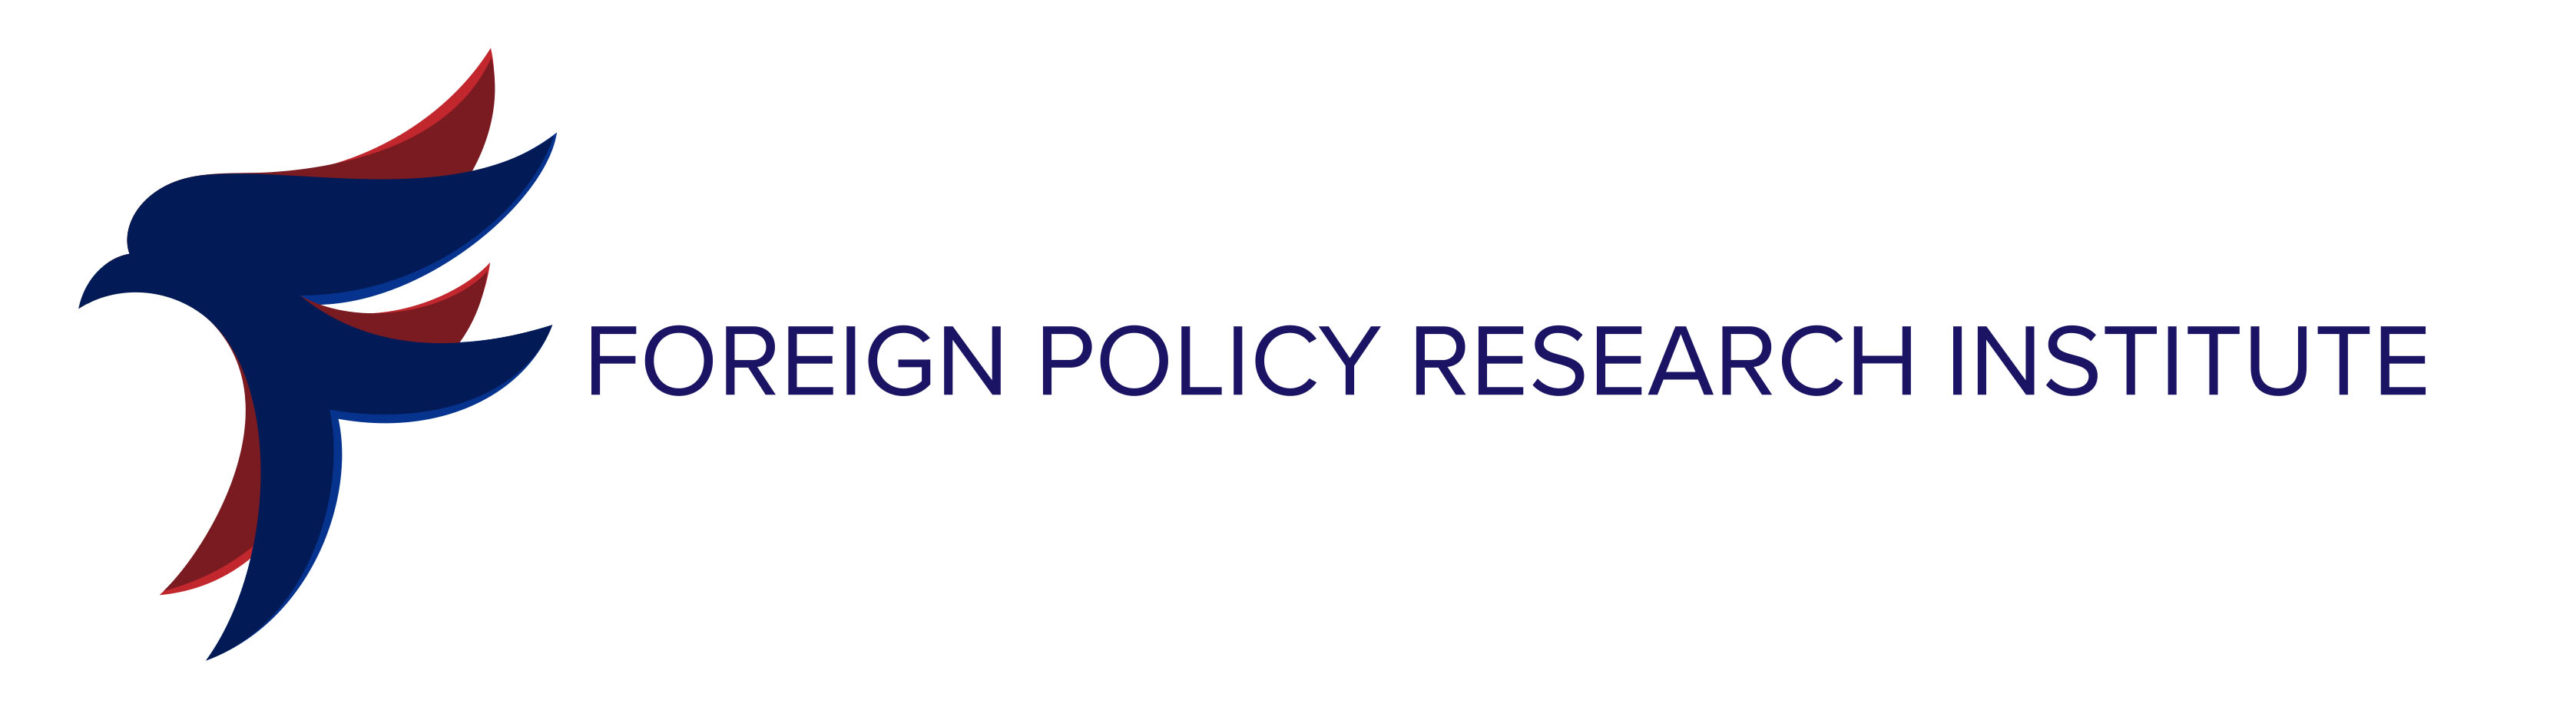 Foreign Policy Research Institute Presidential Search